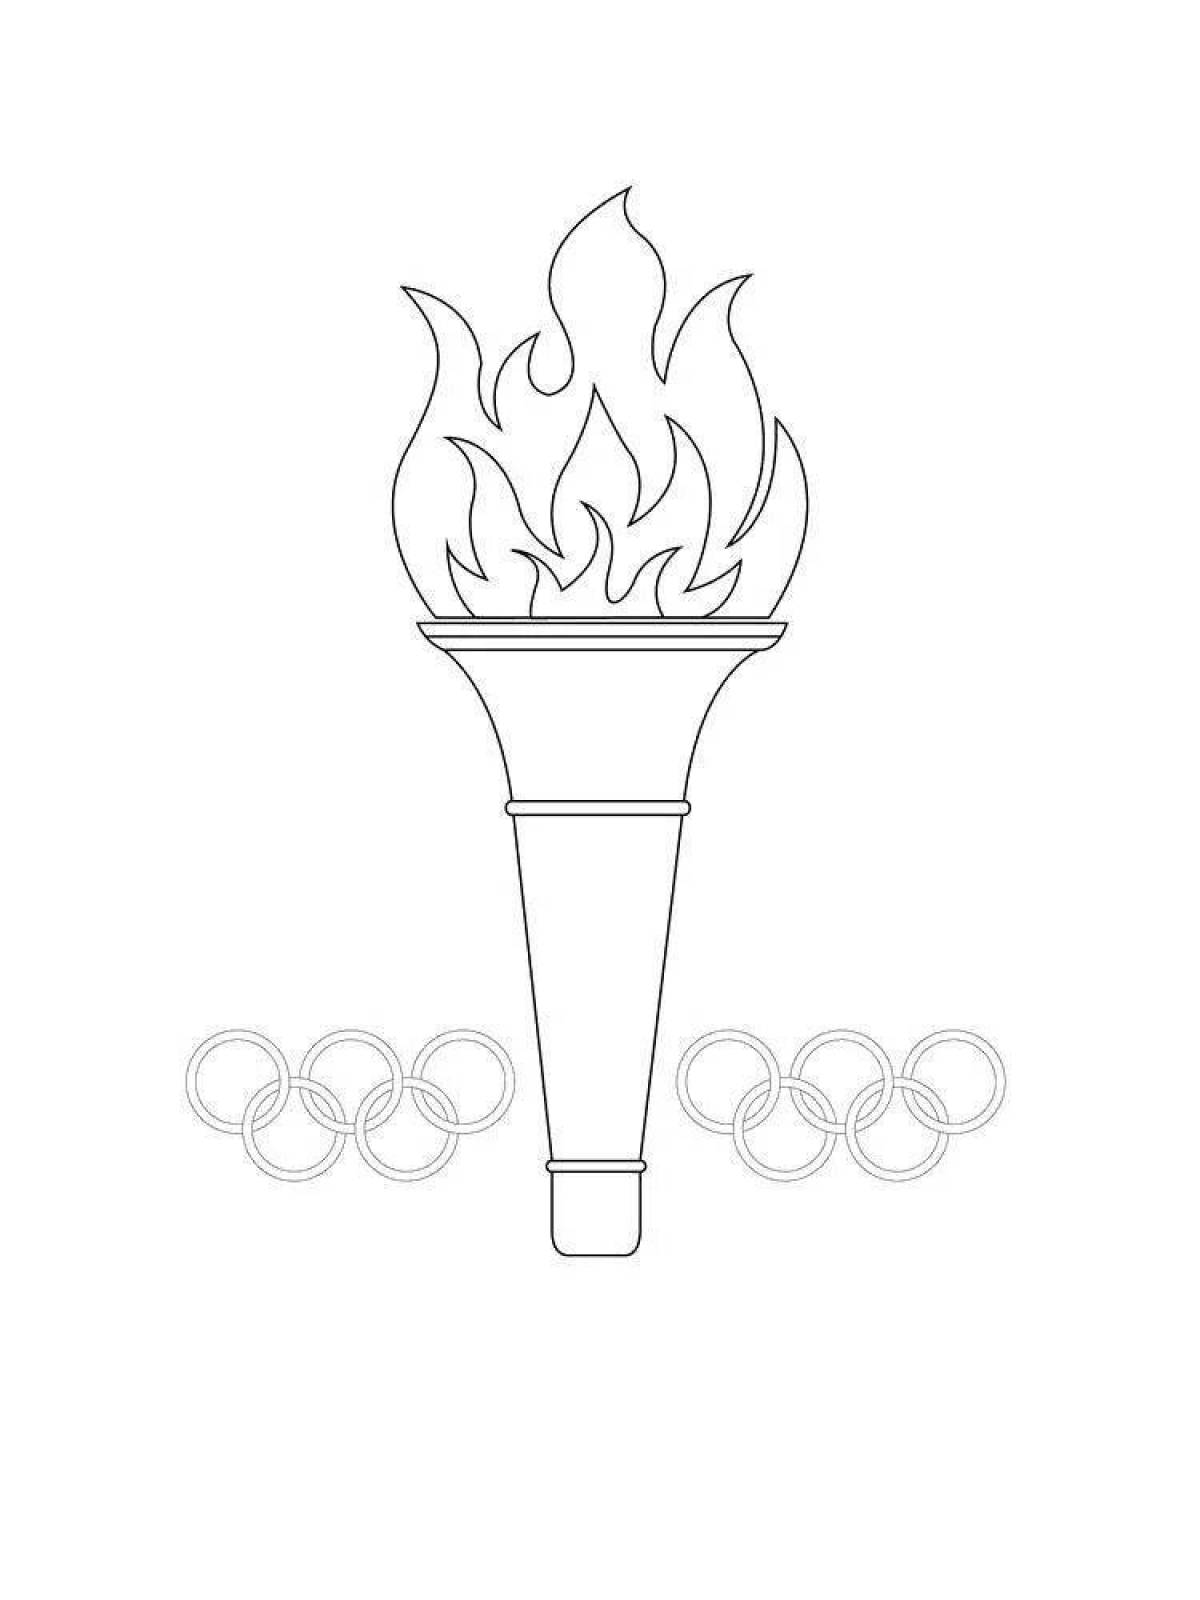 Impressive torch coloring page